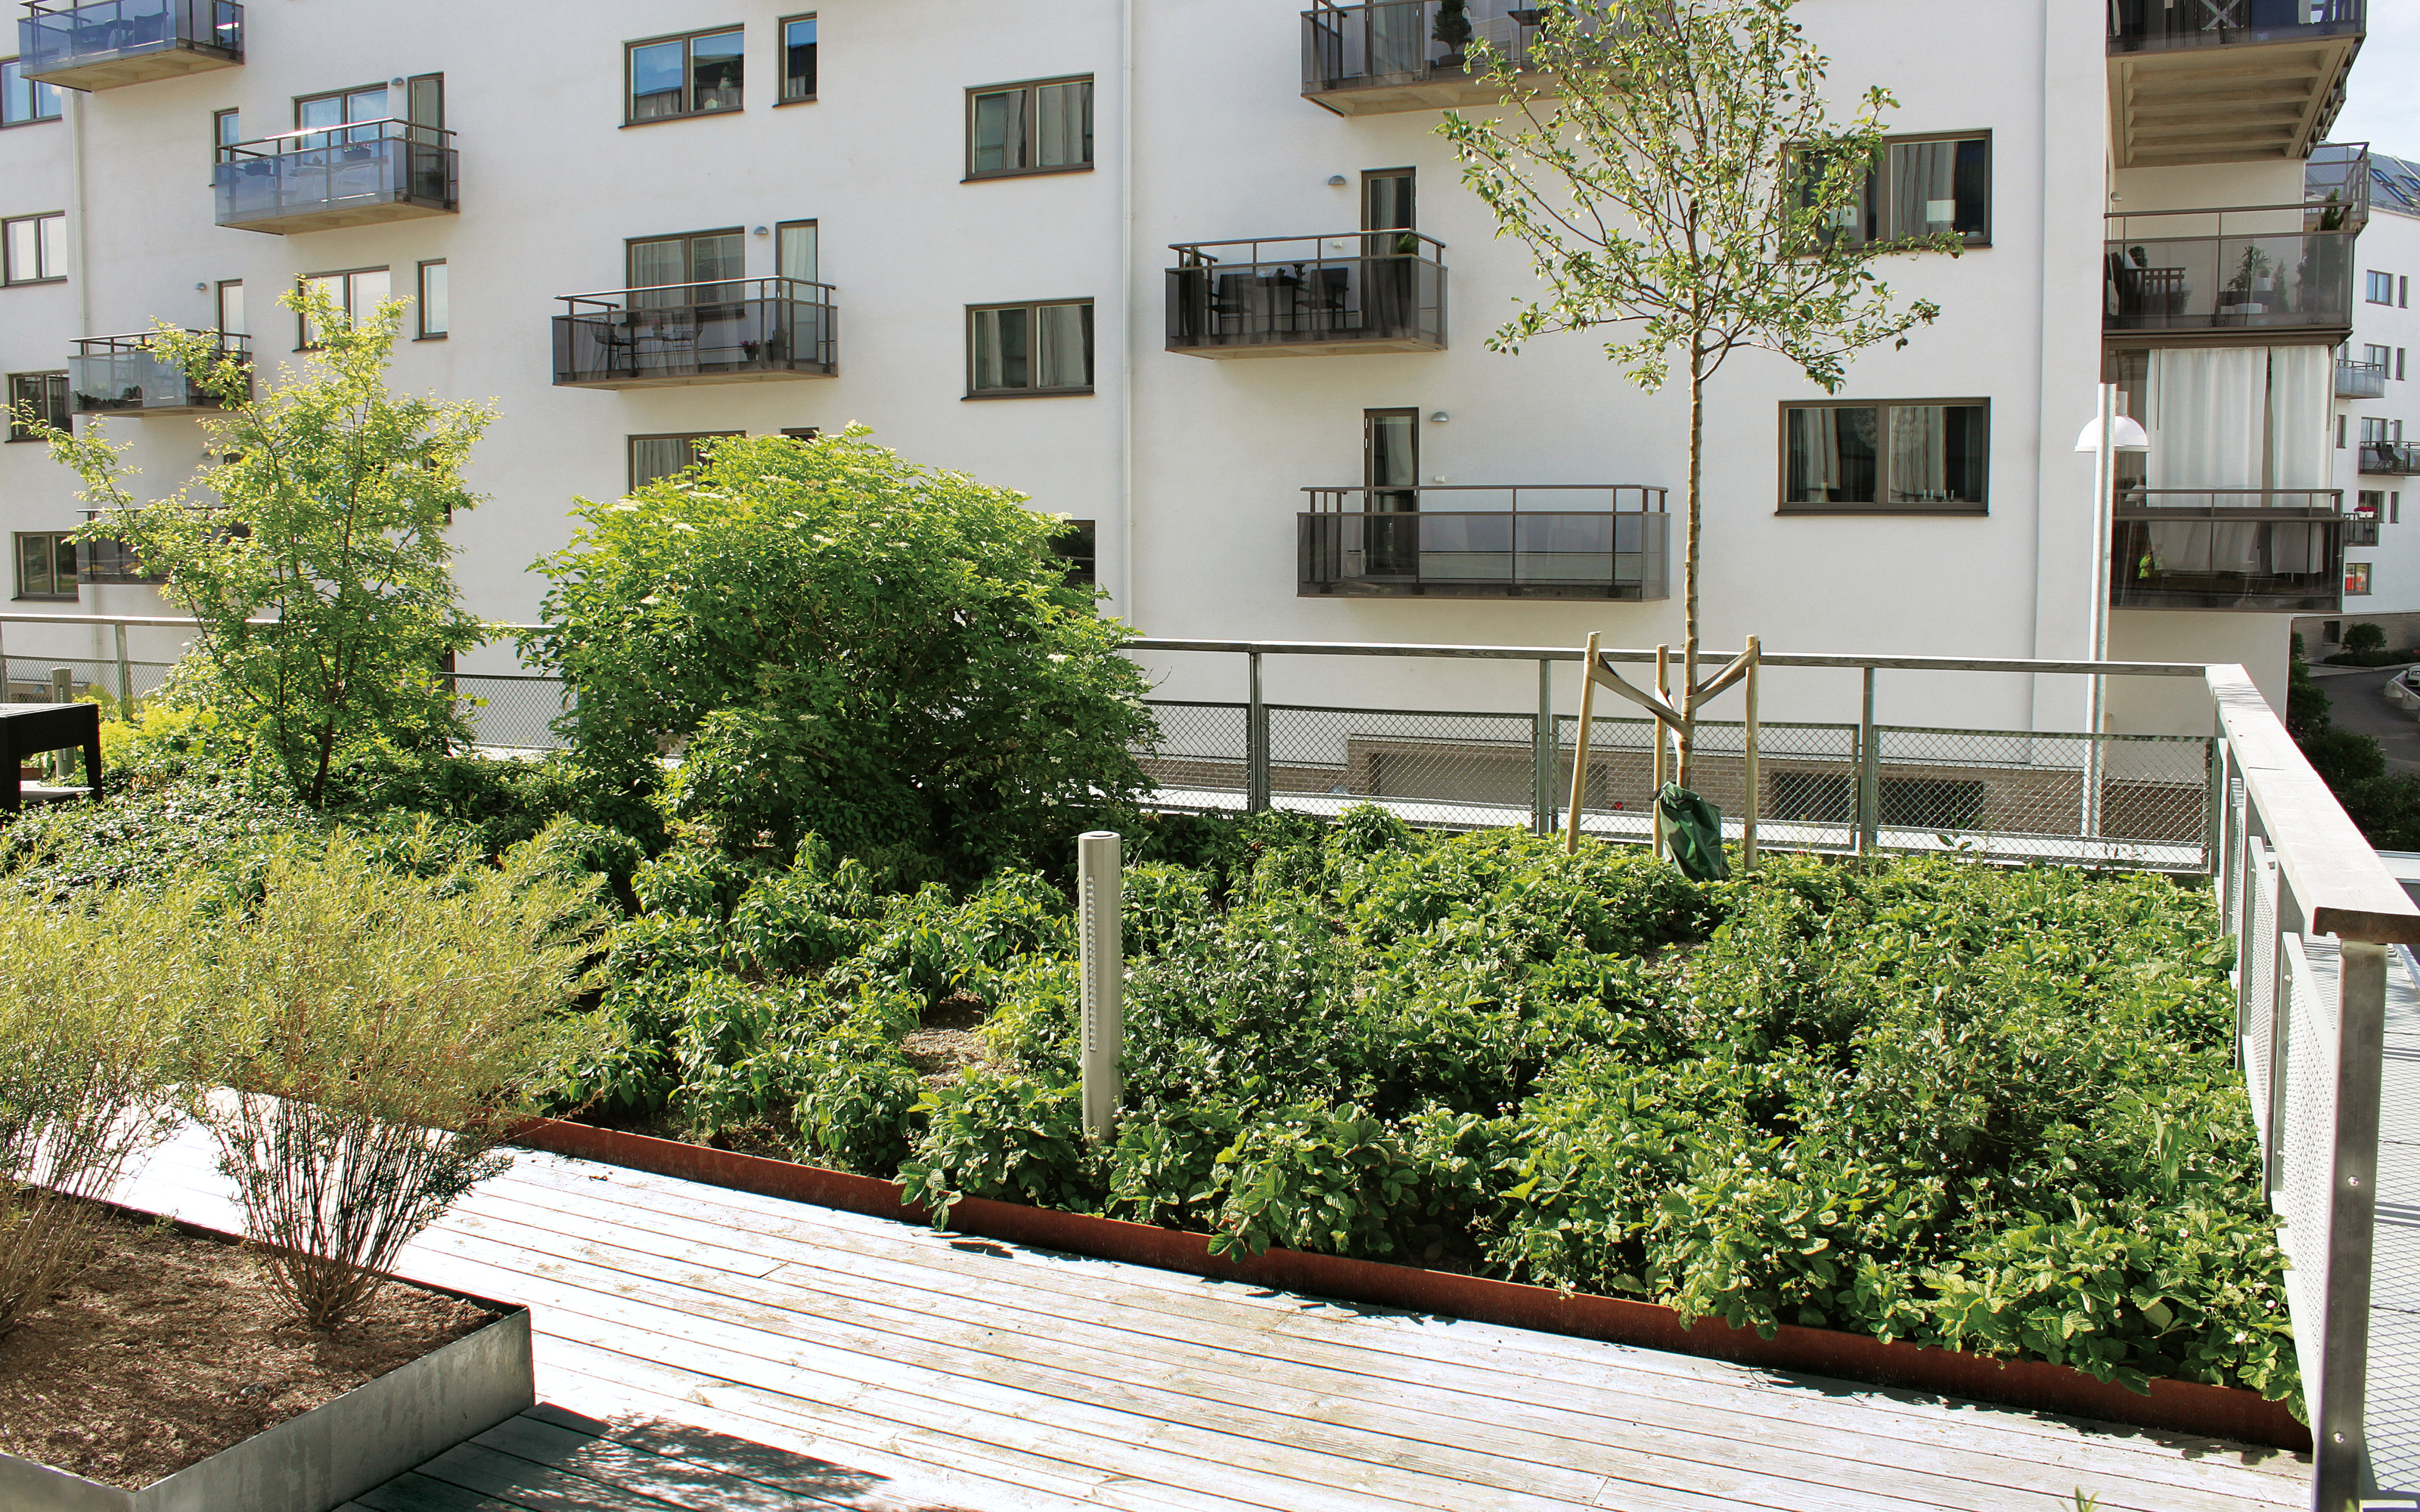 Roof garden with planting beds and railing.